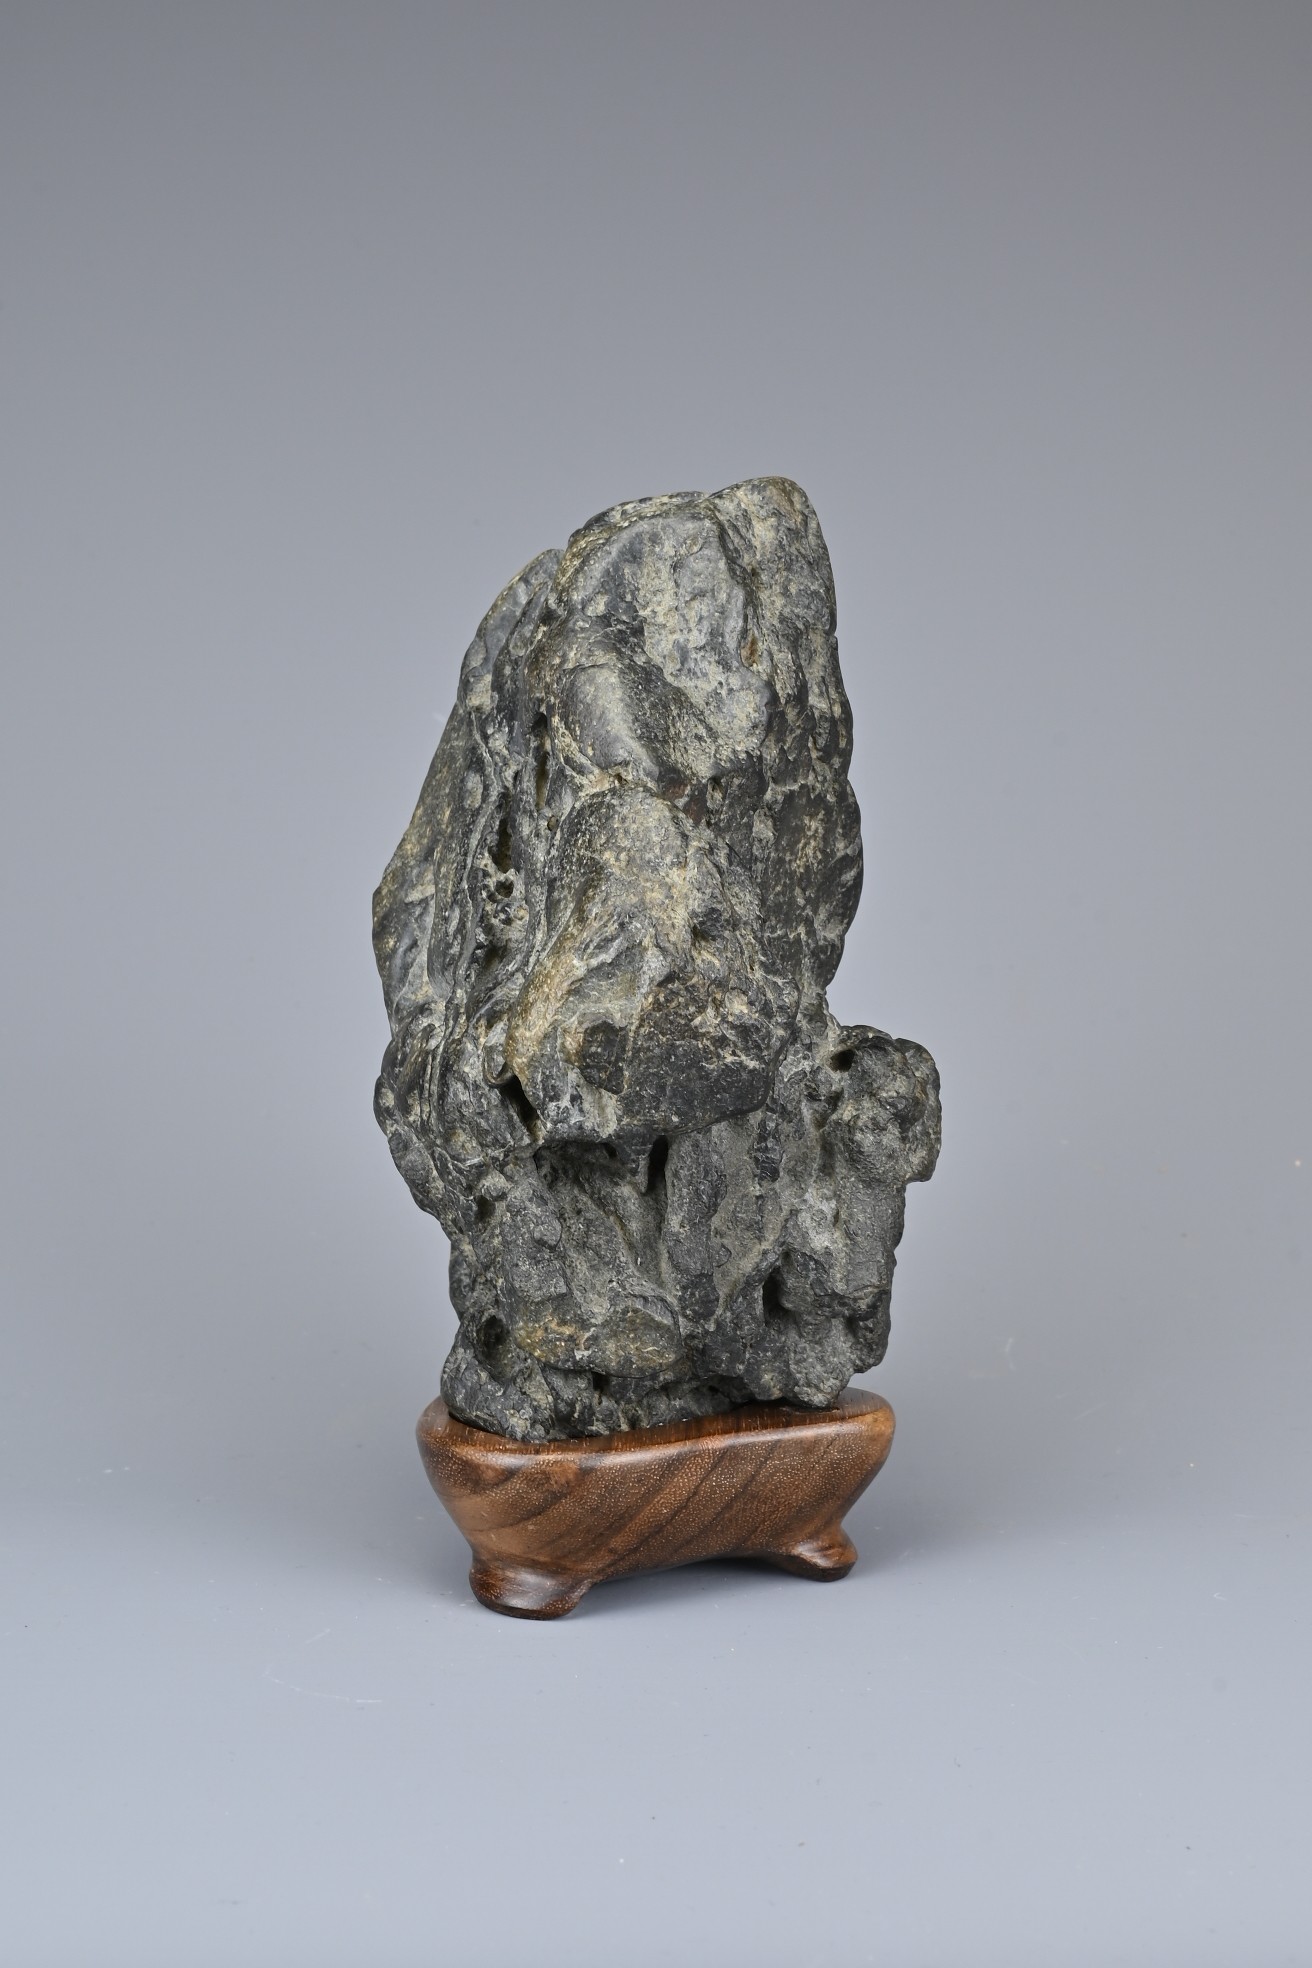 A CHINESE YING SCHOLAR ROCK, QING DYNASTY. Blackish-grey tone stone upright in the form of a - Image 4 of 5